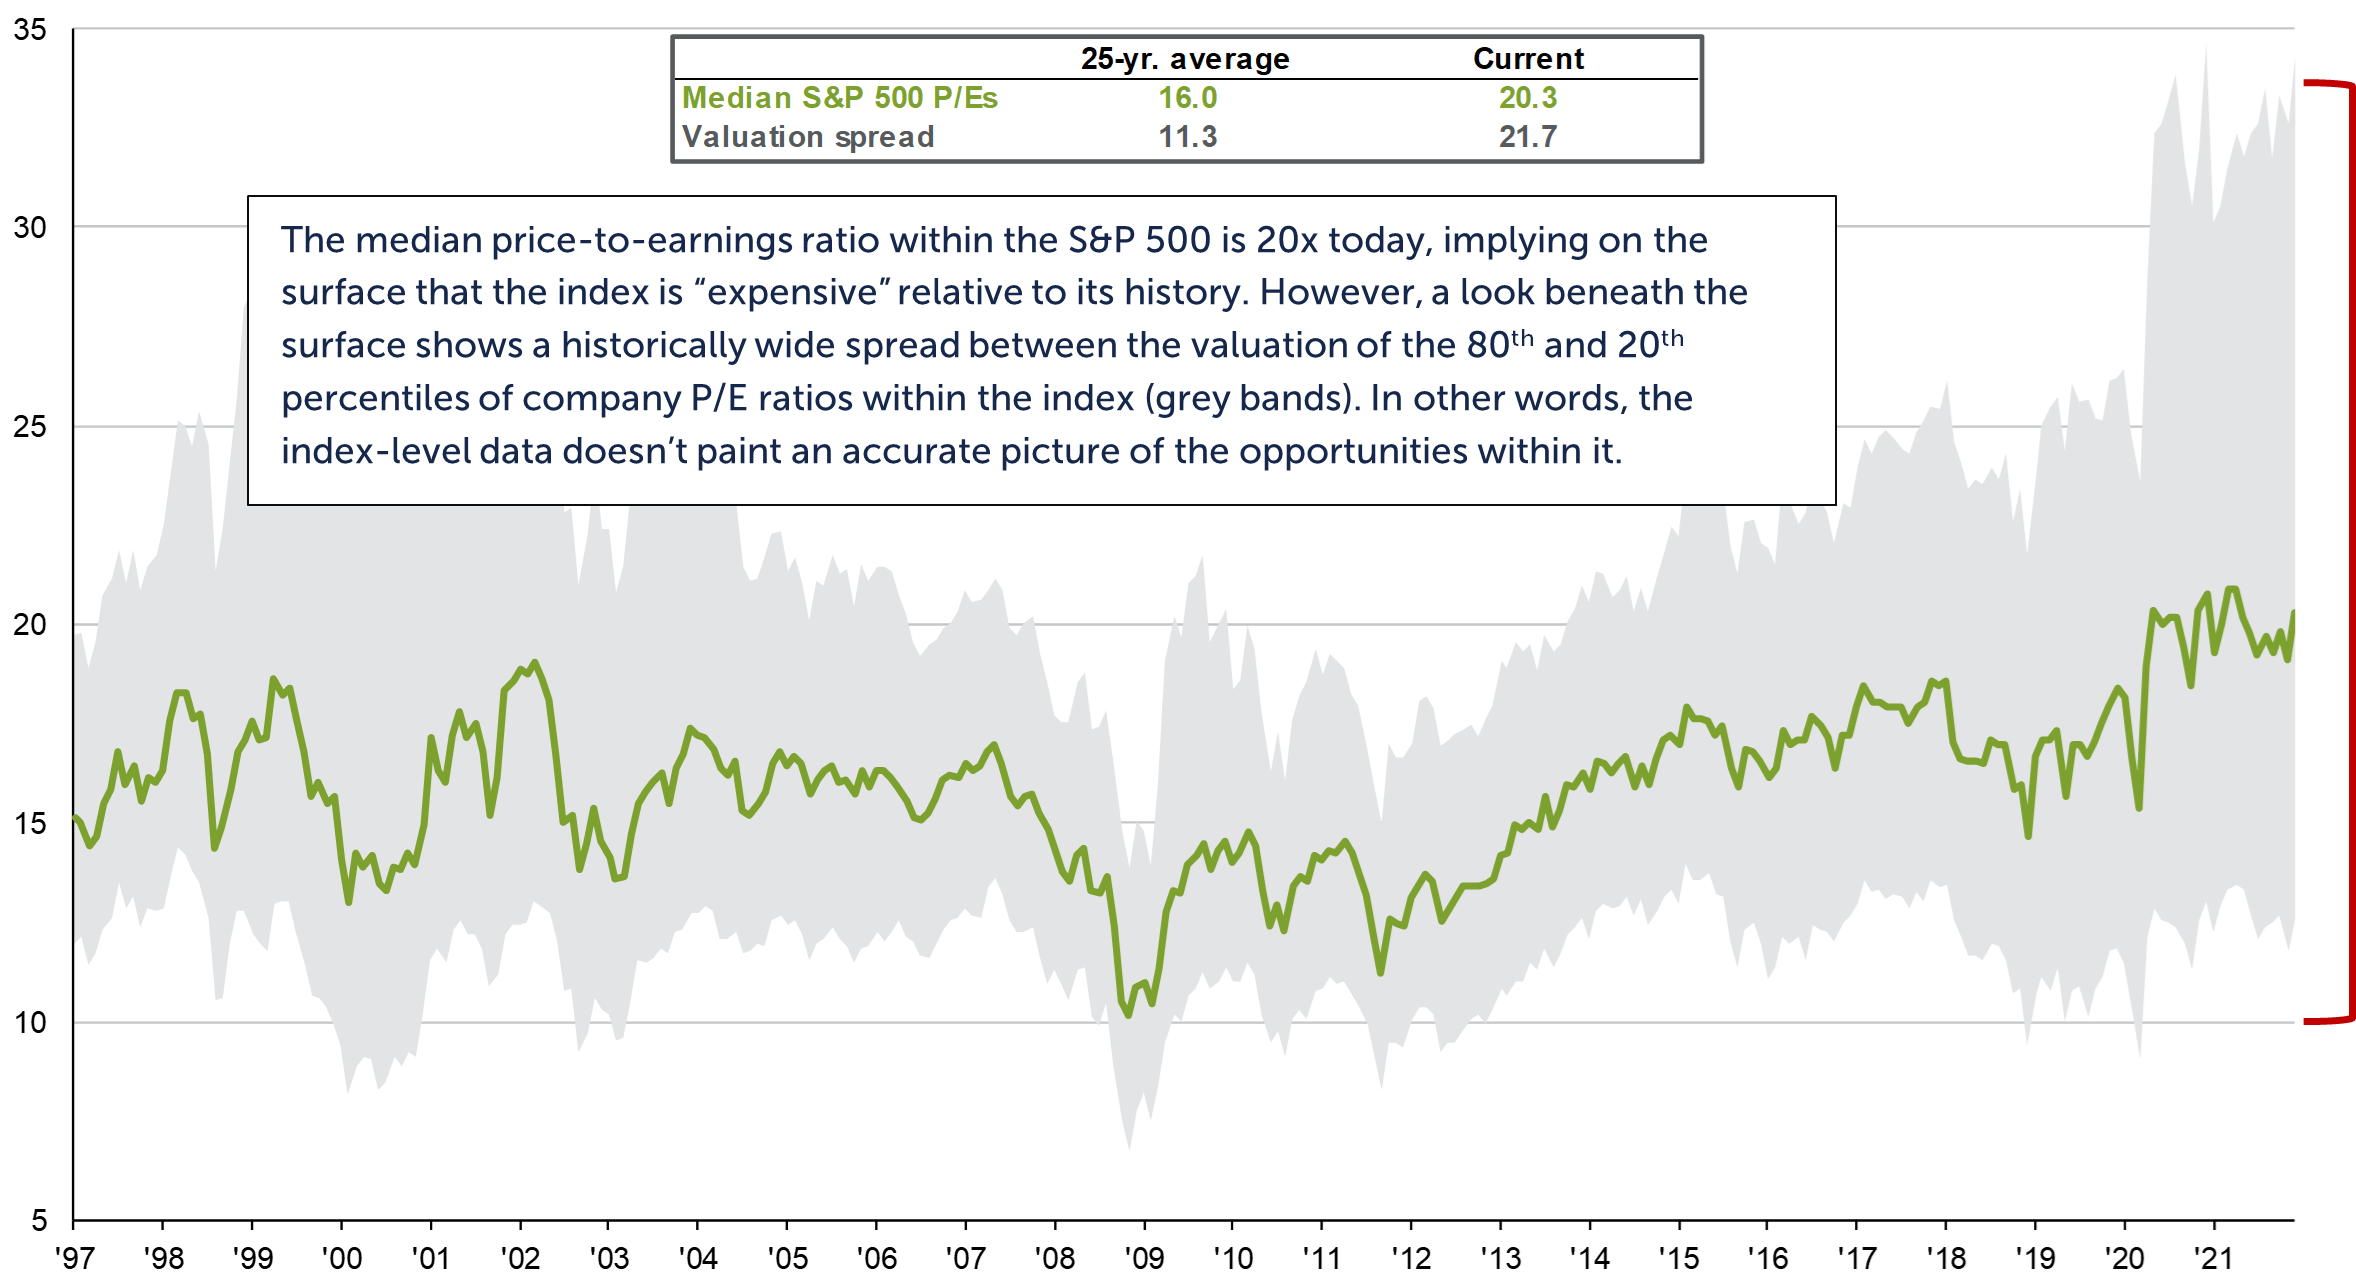 Line graph depicting Median S&P 500 P/Es as well as Valuation Spread, both for their 25-year average and their Current, from 1997 to 2021, with text reading: The median price-to-earnings ratio within the S&P 500 is 20x today, implying on the surface that the index is “expensive” relative to its history. However, a look beneath the surface shows a historically wide spread between the valuation of the 80th and 20th percentiles of company P/E ratios within the index (grey bands). In other words, the index-level data doesn’t paint an accurate picture of the opportunities within it.